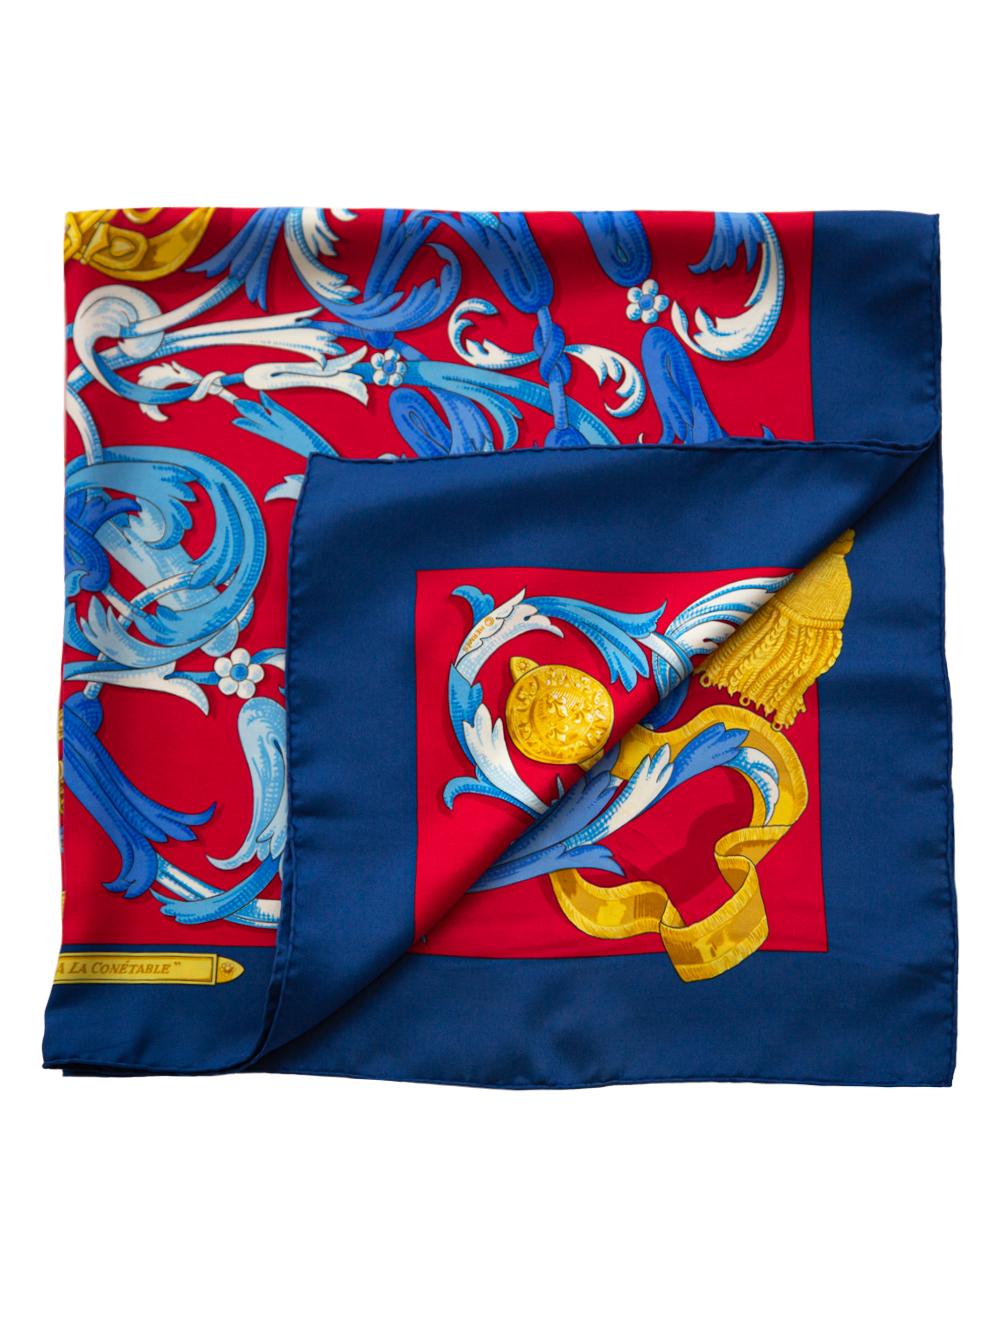 Crafted in France from the finest navy and red silk, this pre-owned scarf by Hermès features lightweight construction, a square shape and print motifs. Designed by Henri d'Origny for Hermes in 1970, this scarf depicts an equestrian theme, a